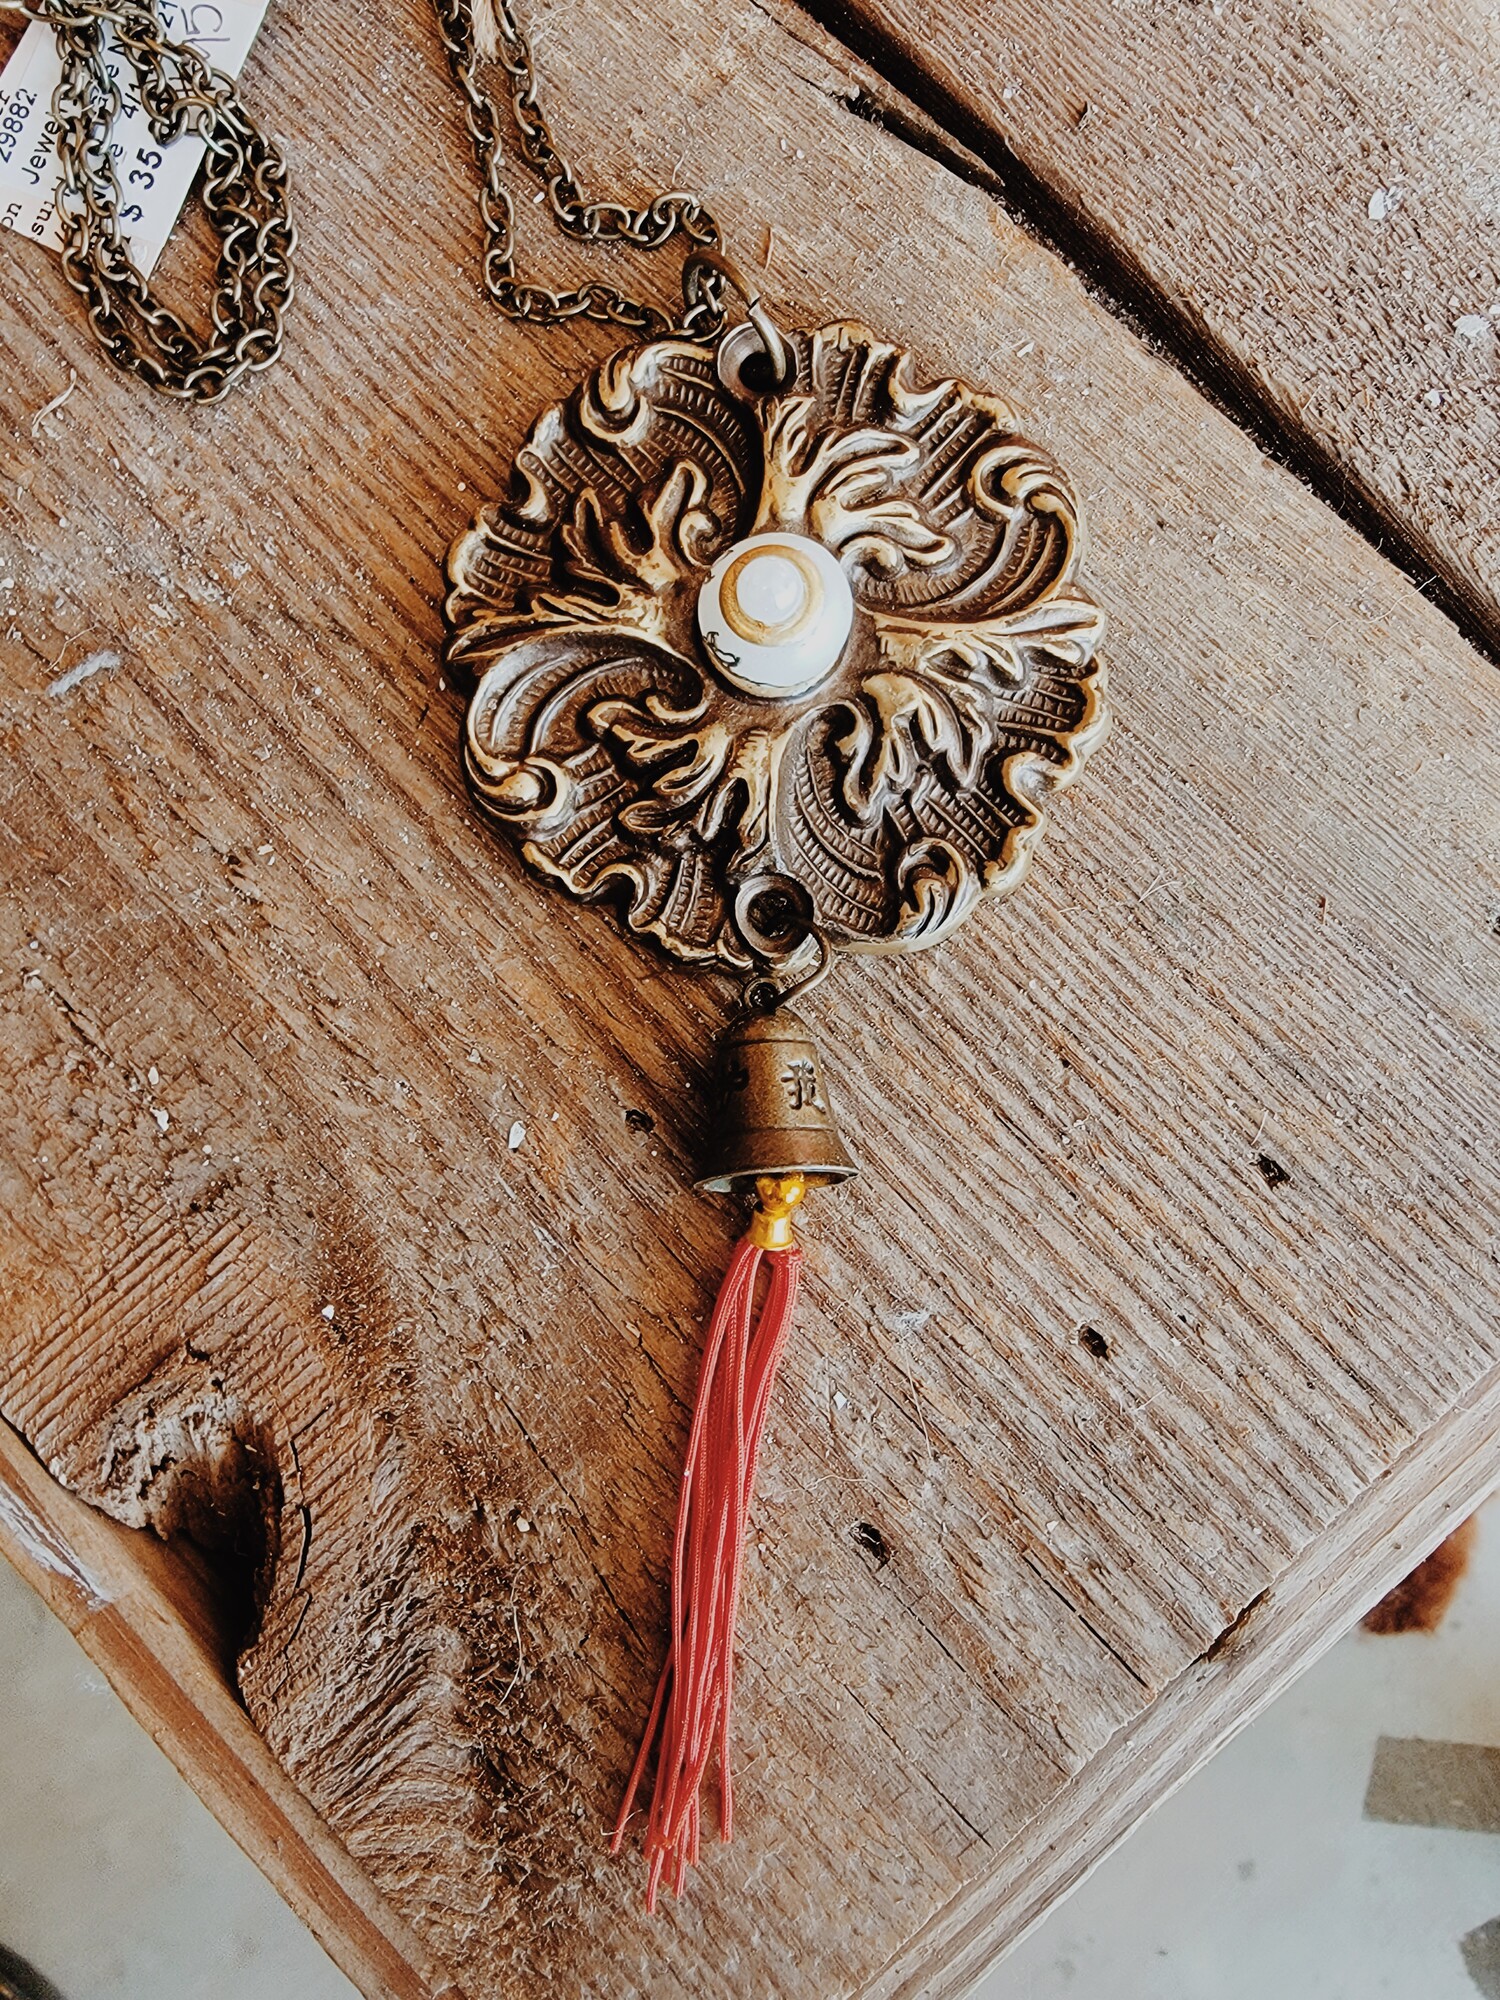 - Hand crafted necklace
- 32 Inch chain
- Red 2 inch tassel
- Brass flower pendant with pearl center